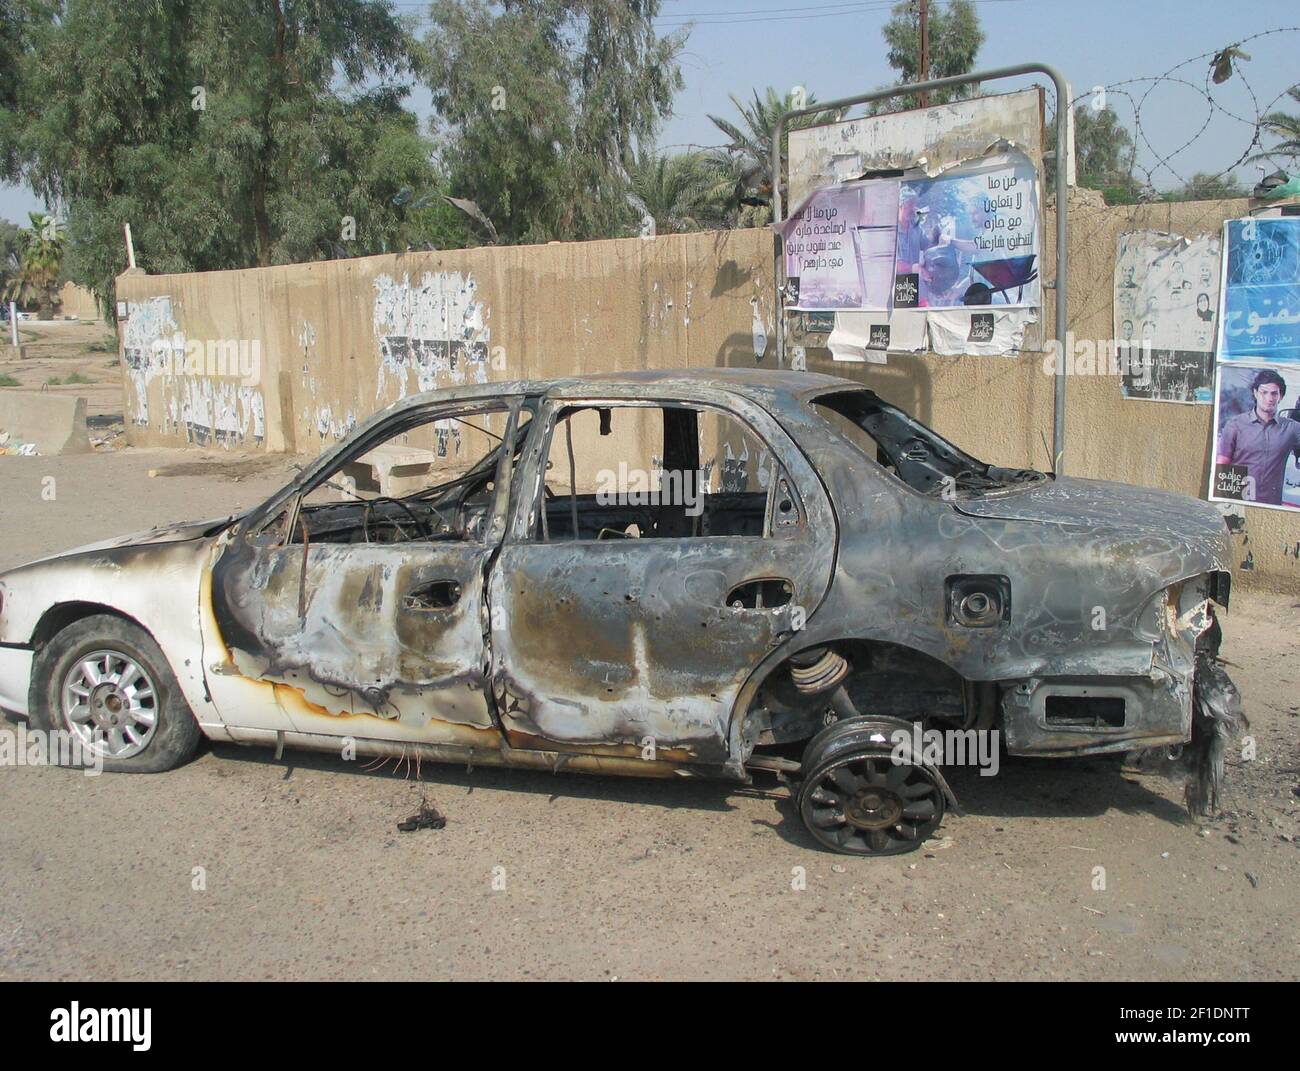 A car sits at a traffic circle in central Baghdad where a shootout with private security company Blackwater left 17 dead in 2007. Witnesses said a woman and child were killed in the car. On April 13, 2015, a federal judge sentenced one former Blackwater security guard to life in prison and three others to 30 years over the incident. (Photo by Hussein Kadhim/TNS) *** Please Use Credit from Credit Field *** Stock Photo